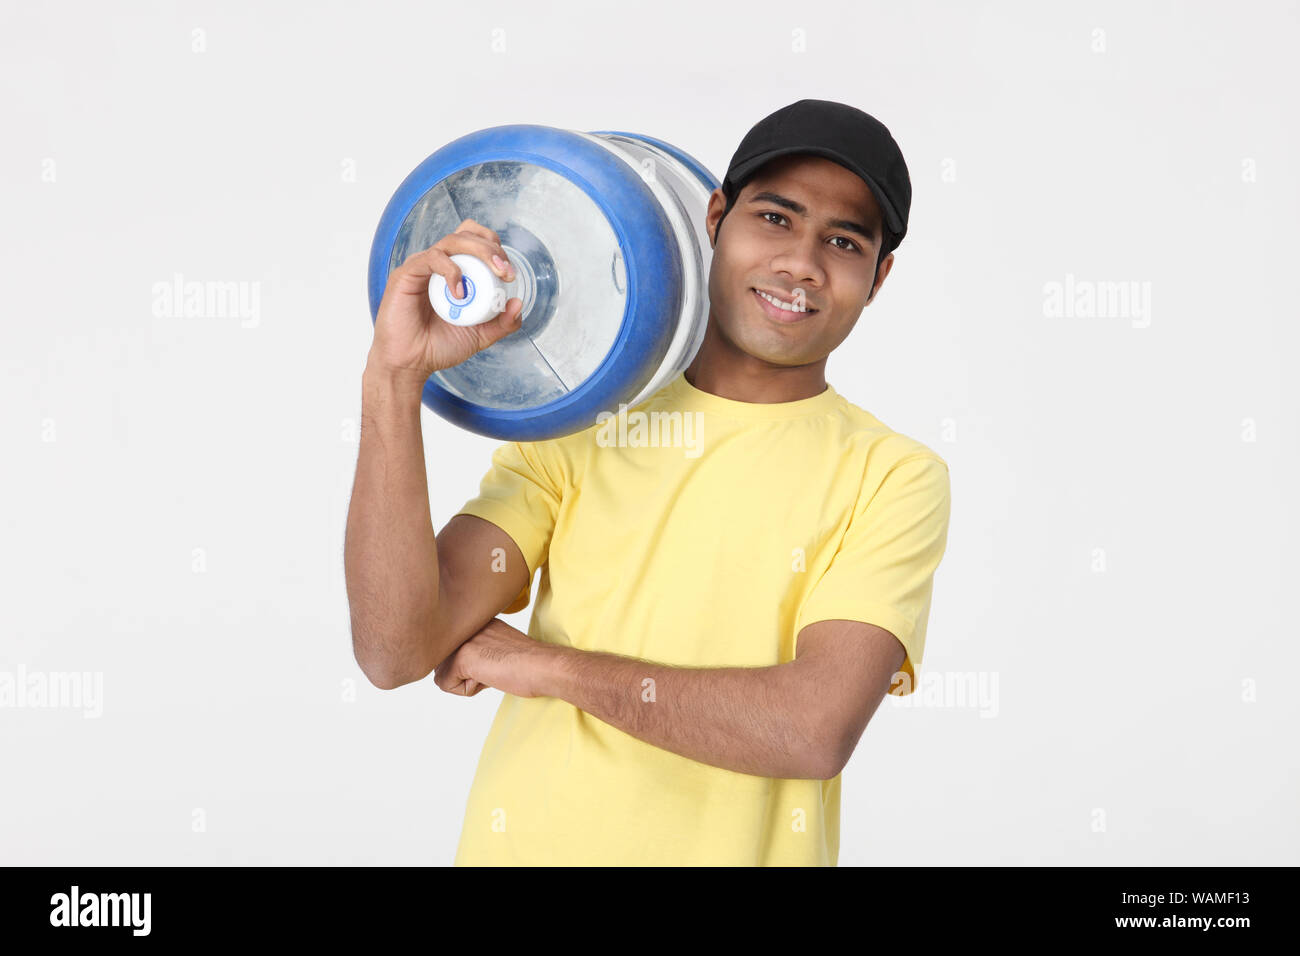 https://c8.alamy.com/comp/WAMF13/delivery-man-carrying-water-bottle-WAMF13.jpg